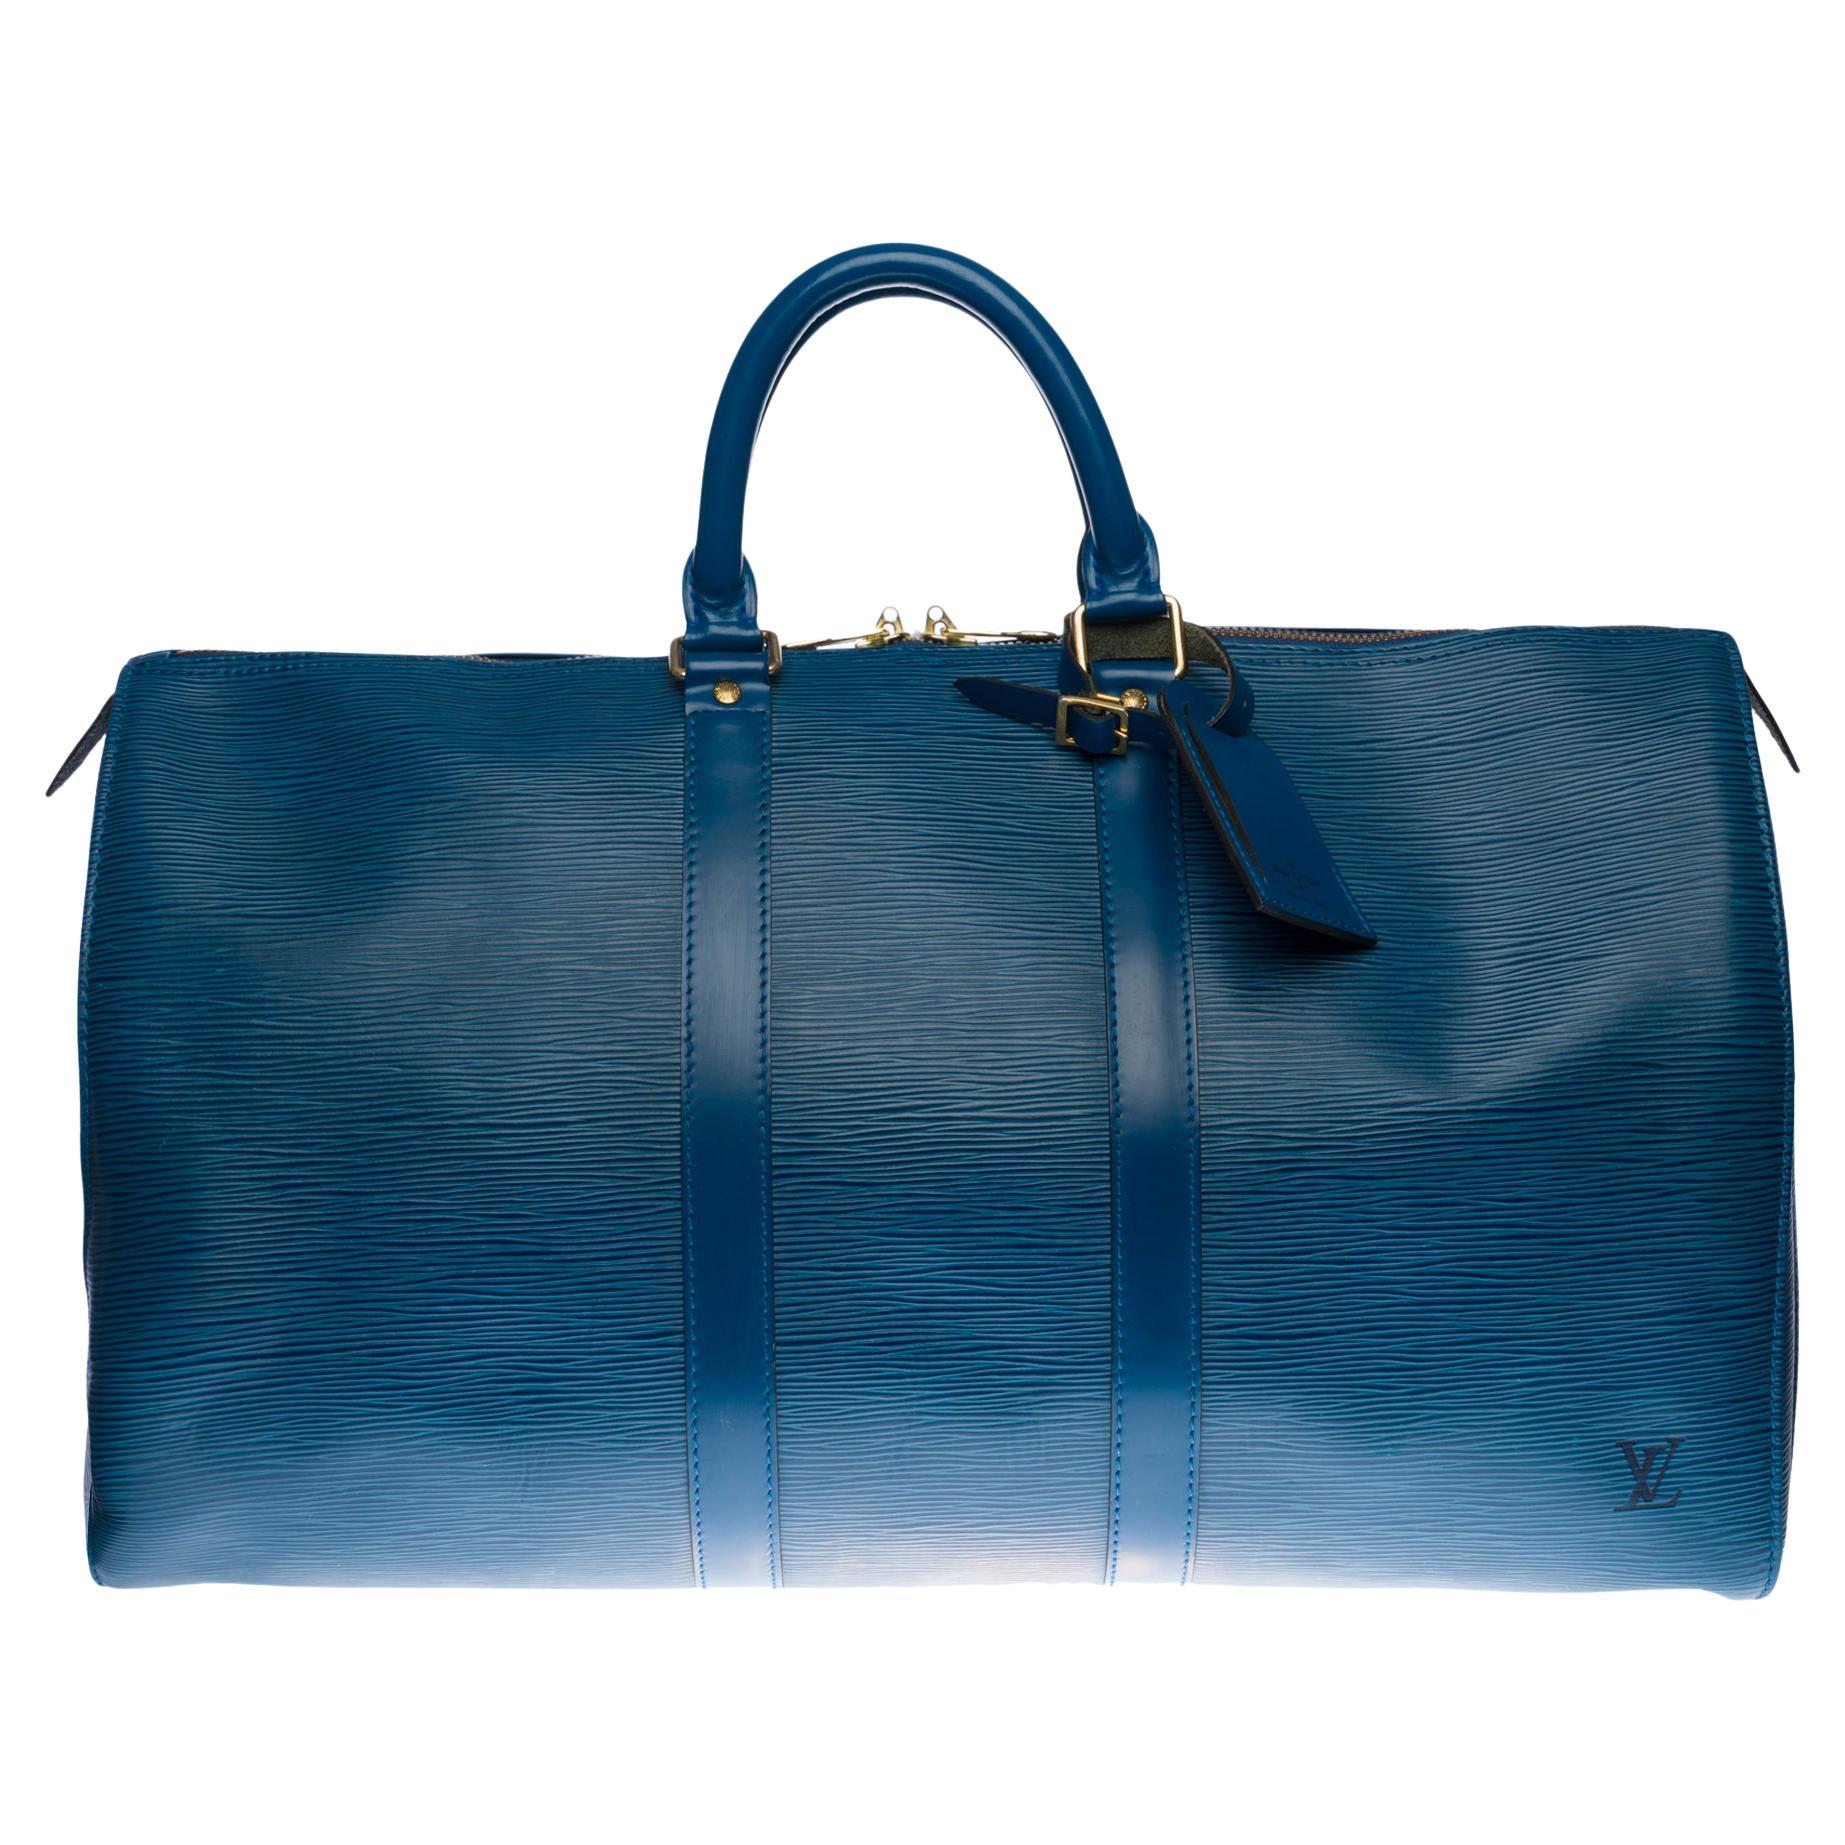 Louis Vuitton Keepall 45 Travel bag in blue épi leather at 1stDibs